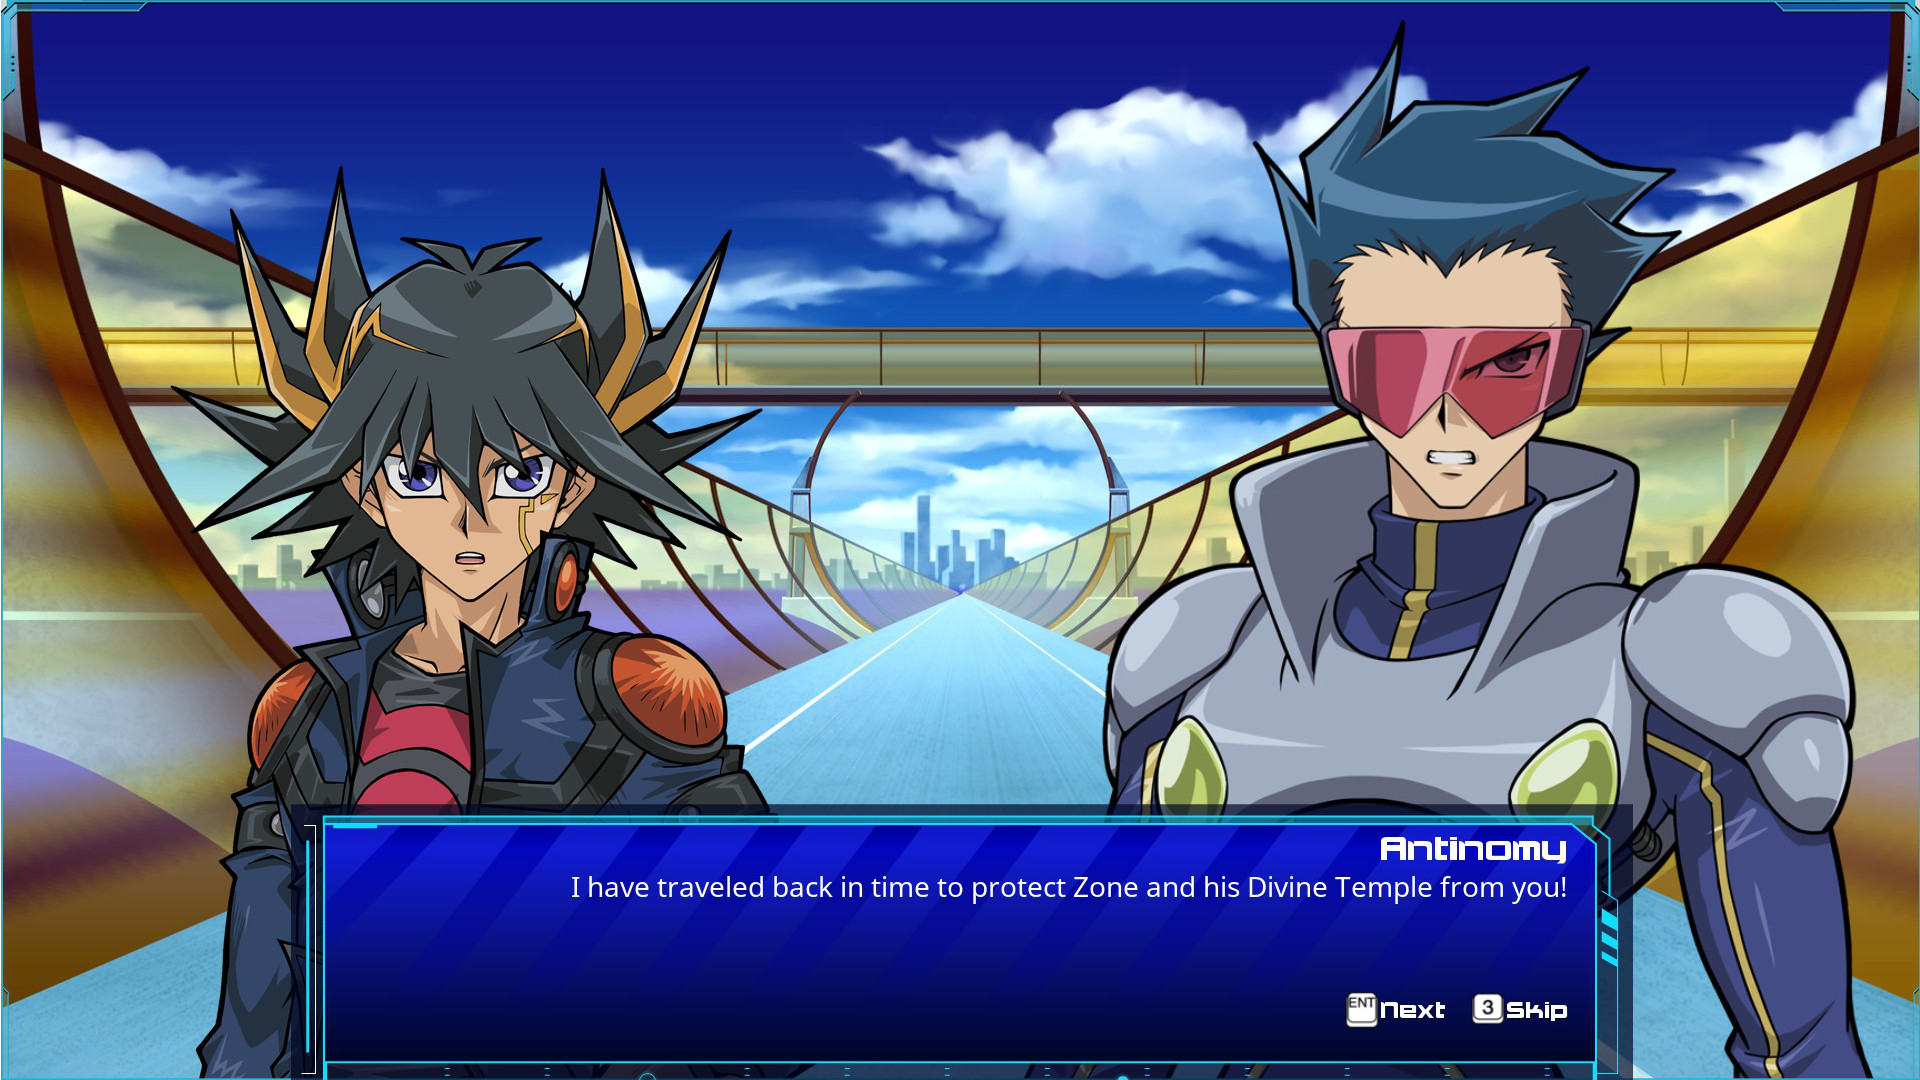 Yu-Gi-Oh! - 5D’s For the Future DLC Steam CD Key $1.04